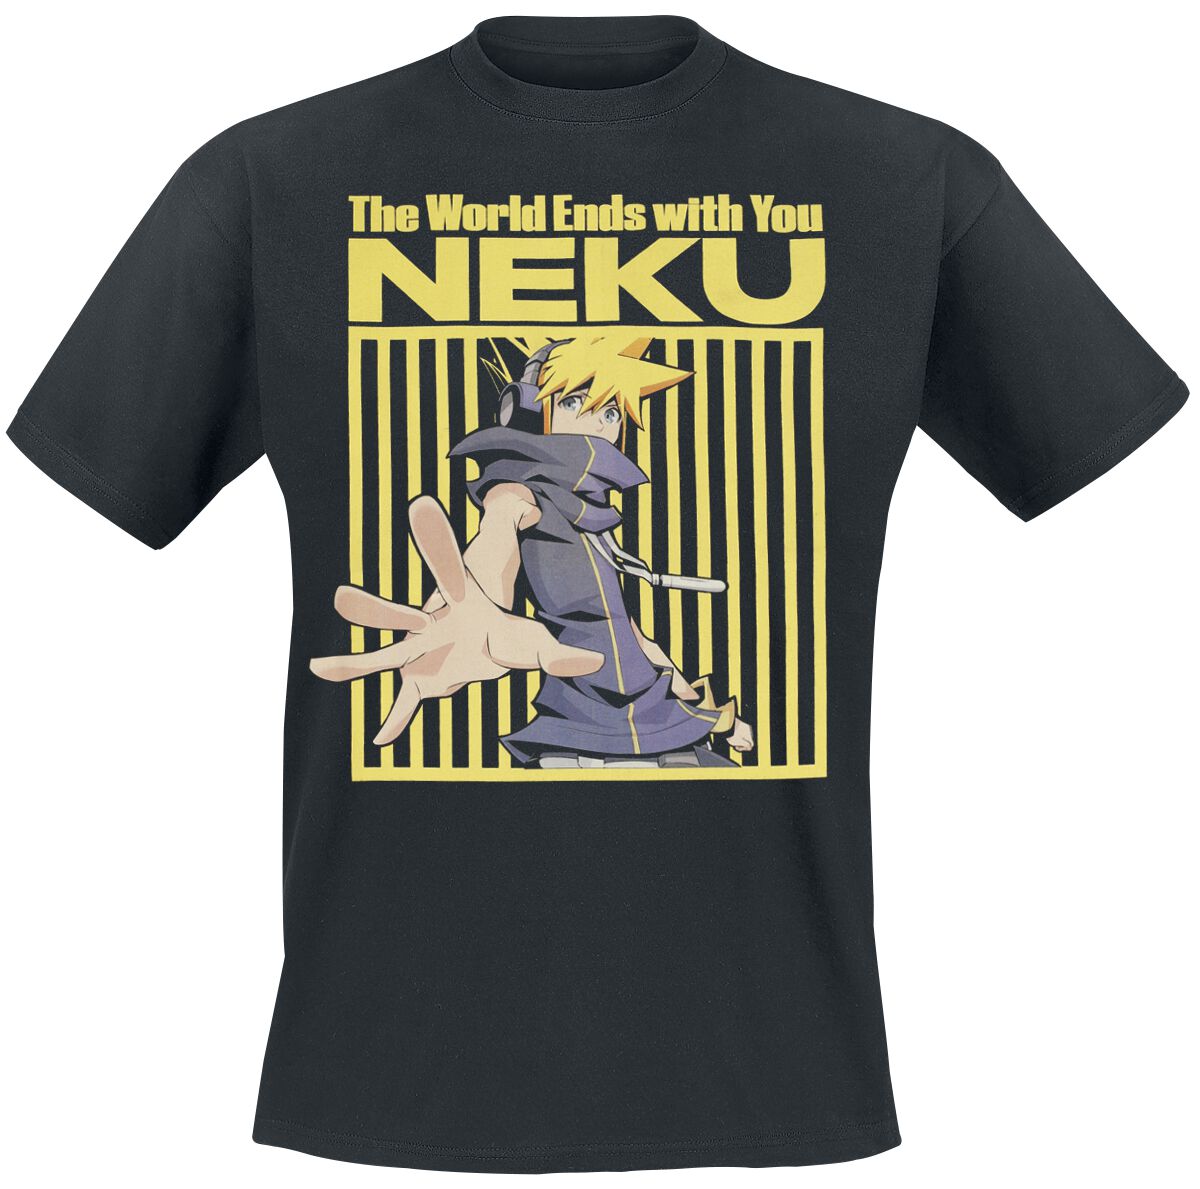 The World Ends With You Neku T-Shirt schwarz in XL